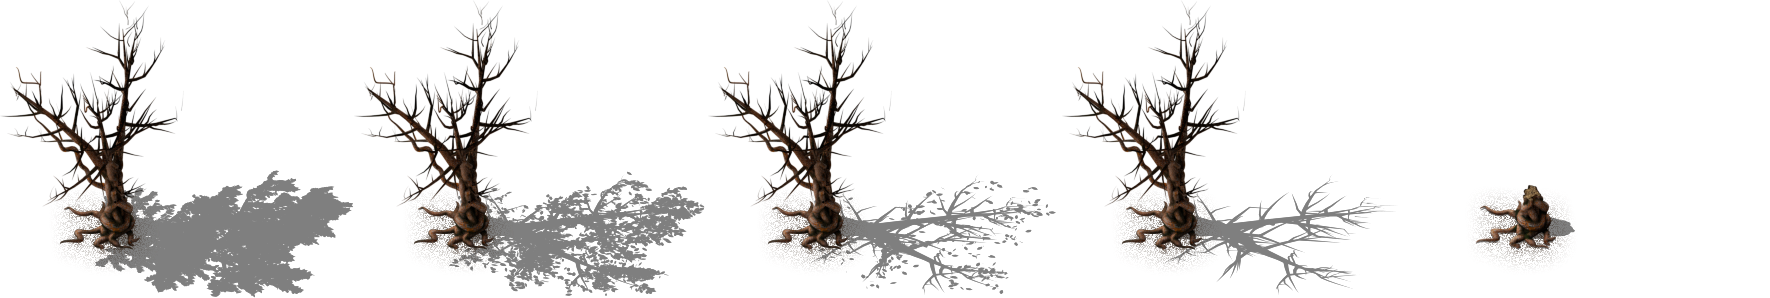 hr-tree-01-a-trunk.png